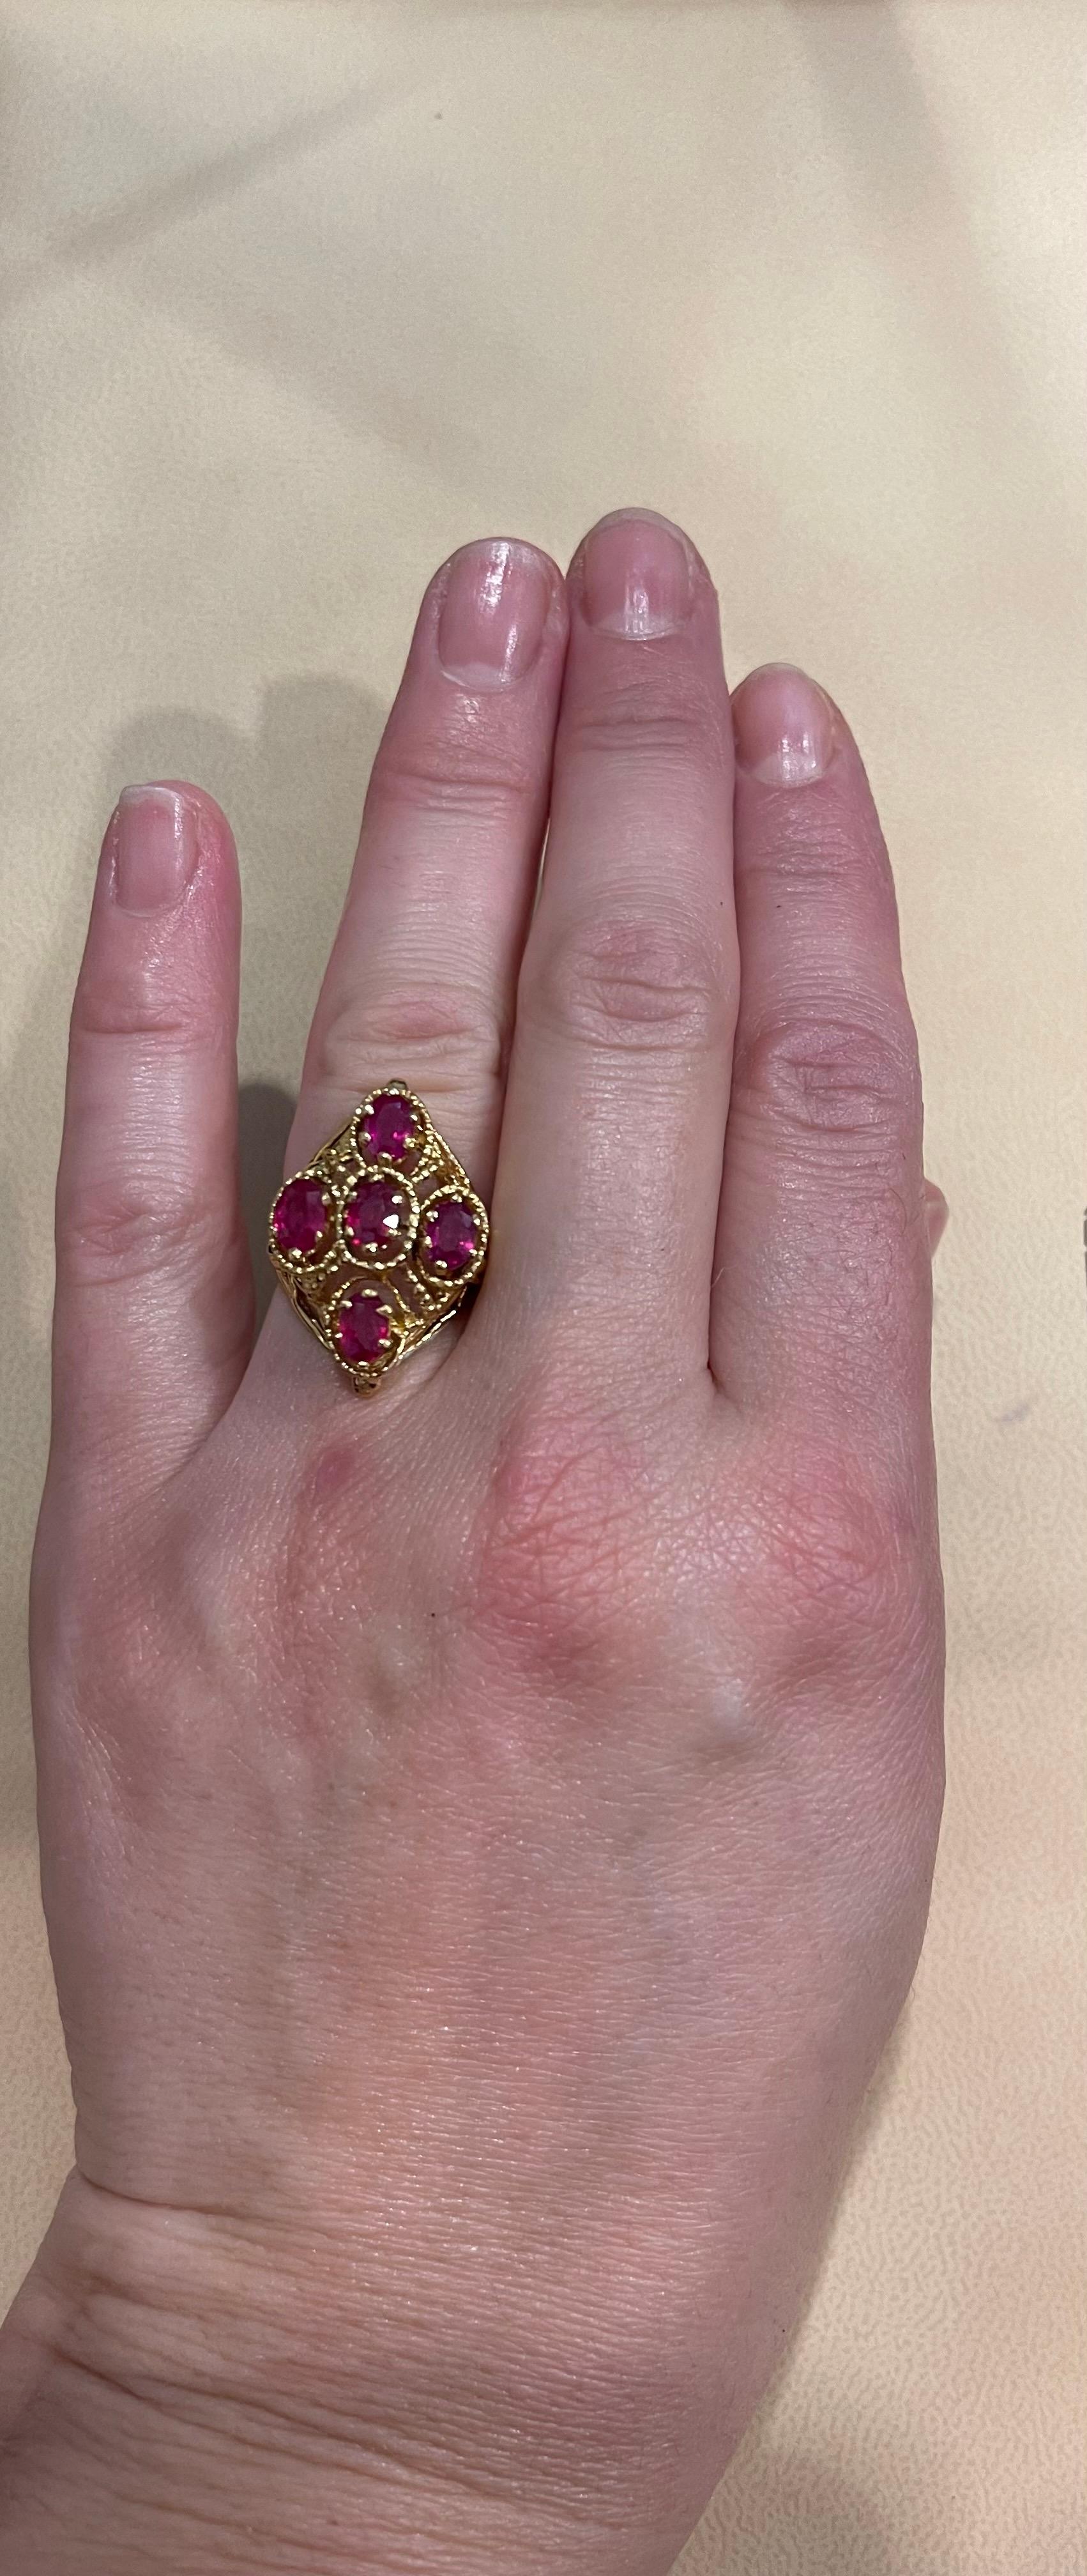 Oval Cut Treated Rubies 5 Ct 14 Karat Yellow Gold Flower Cocktail Ring For Sale 11